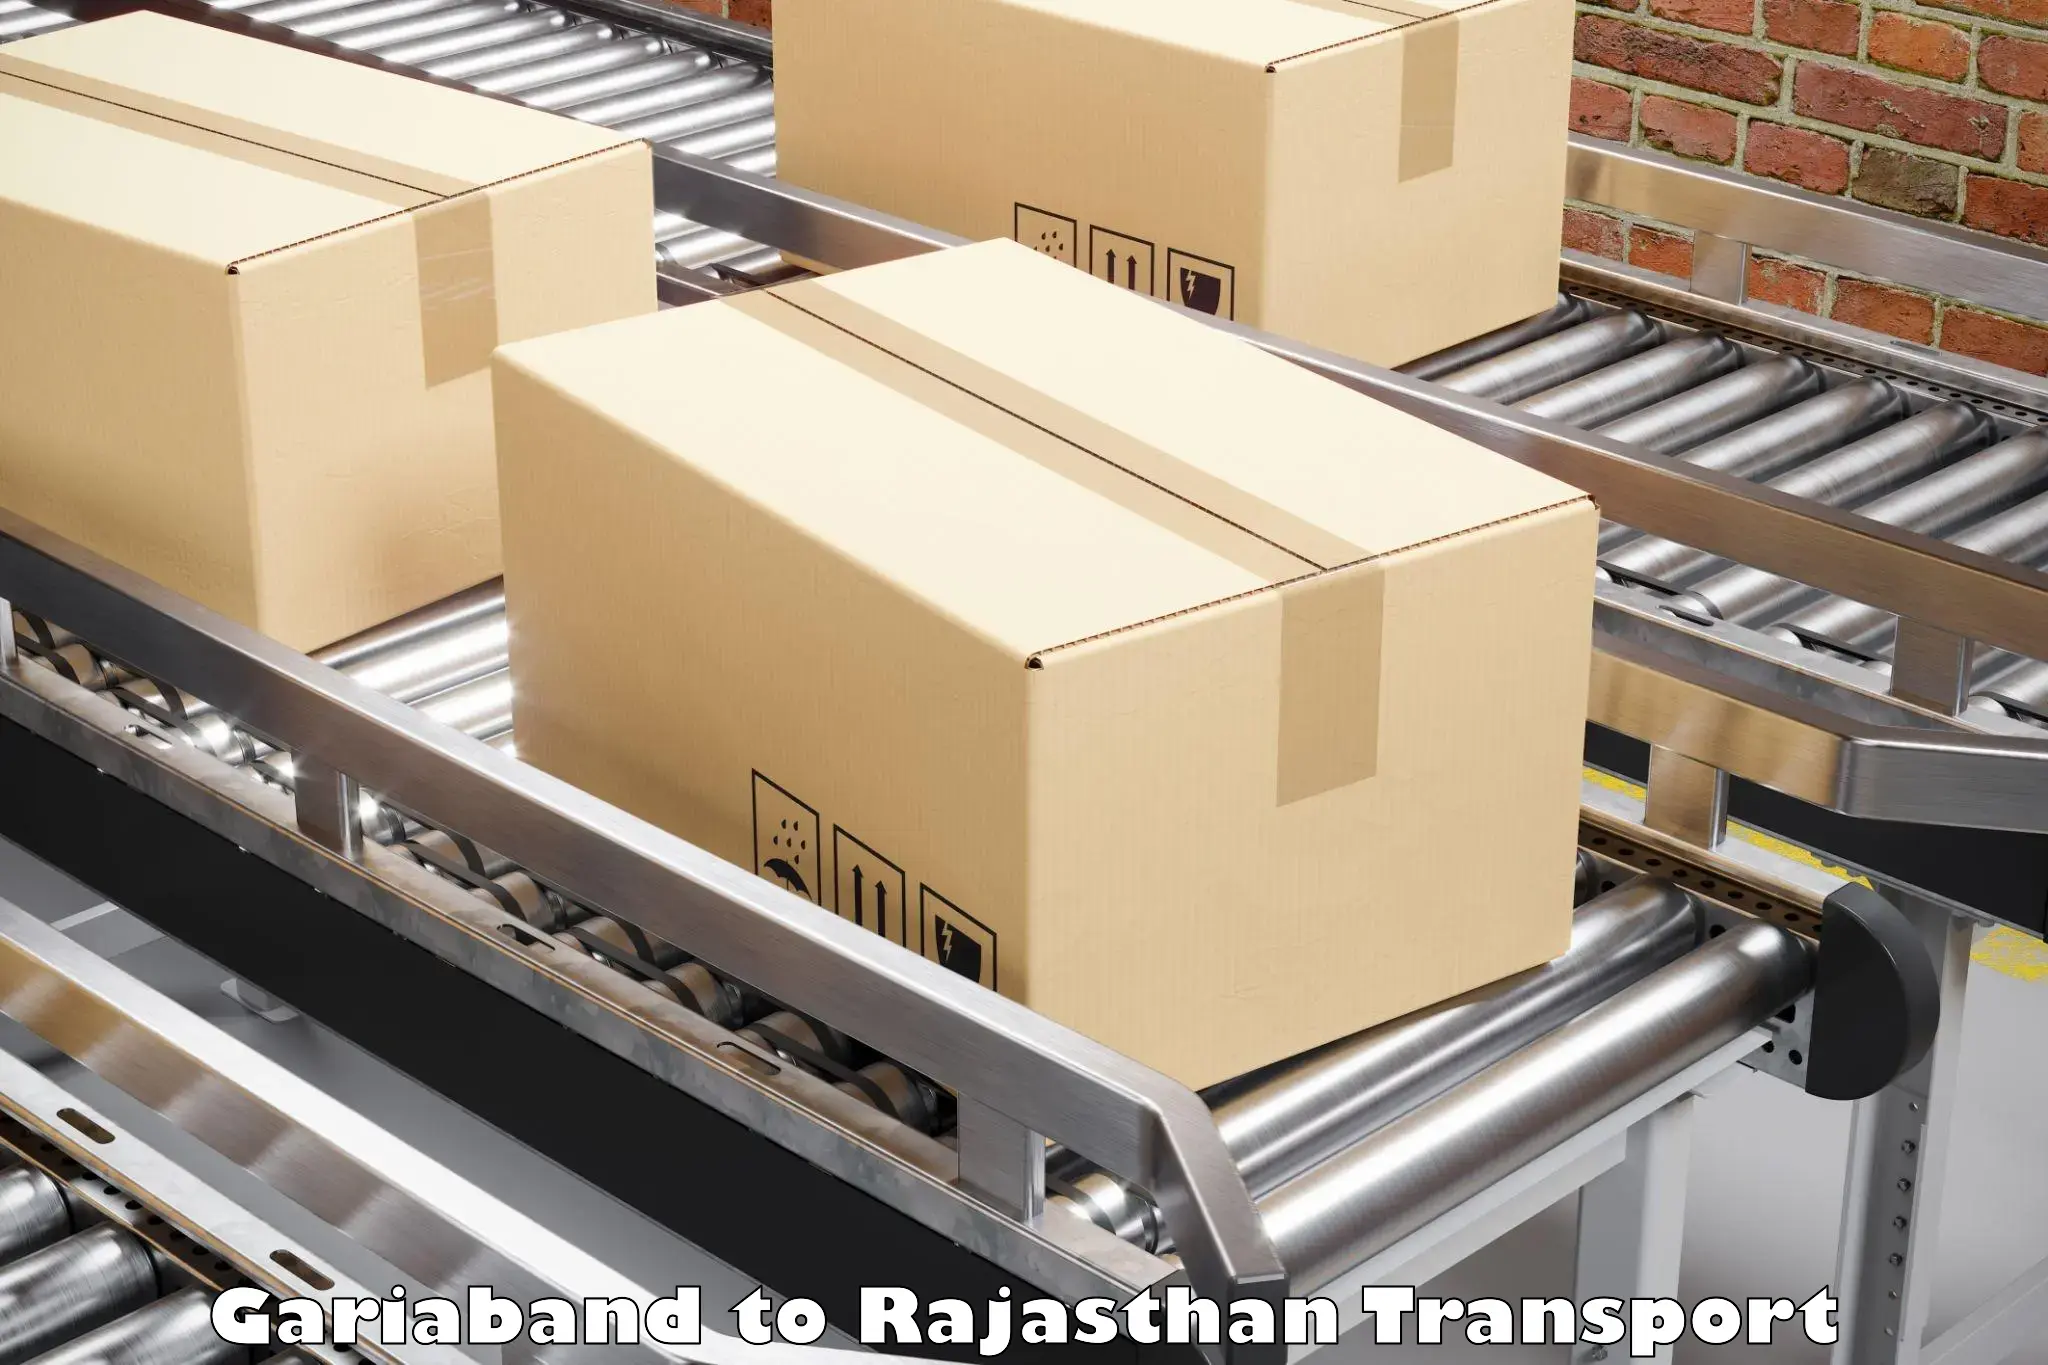 Truck transport companies in India in Gariaband to Rajasthan